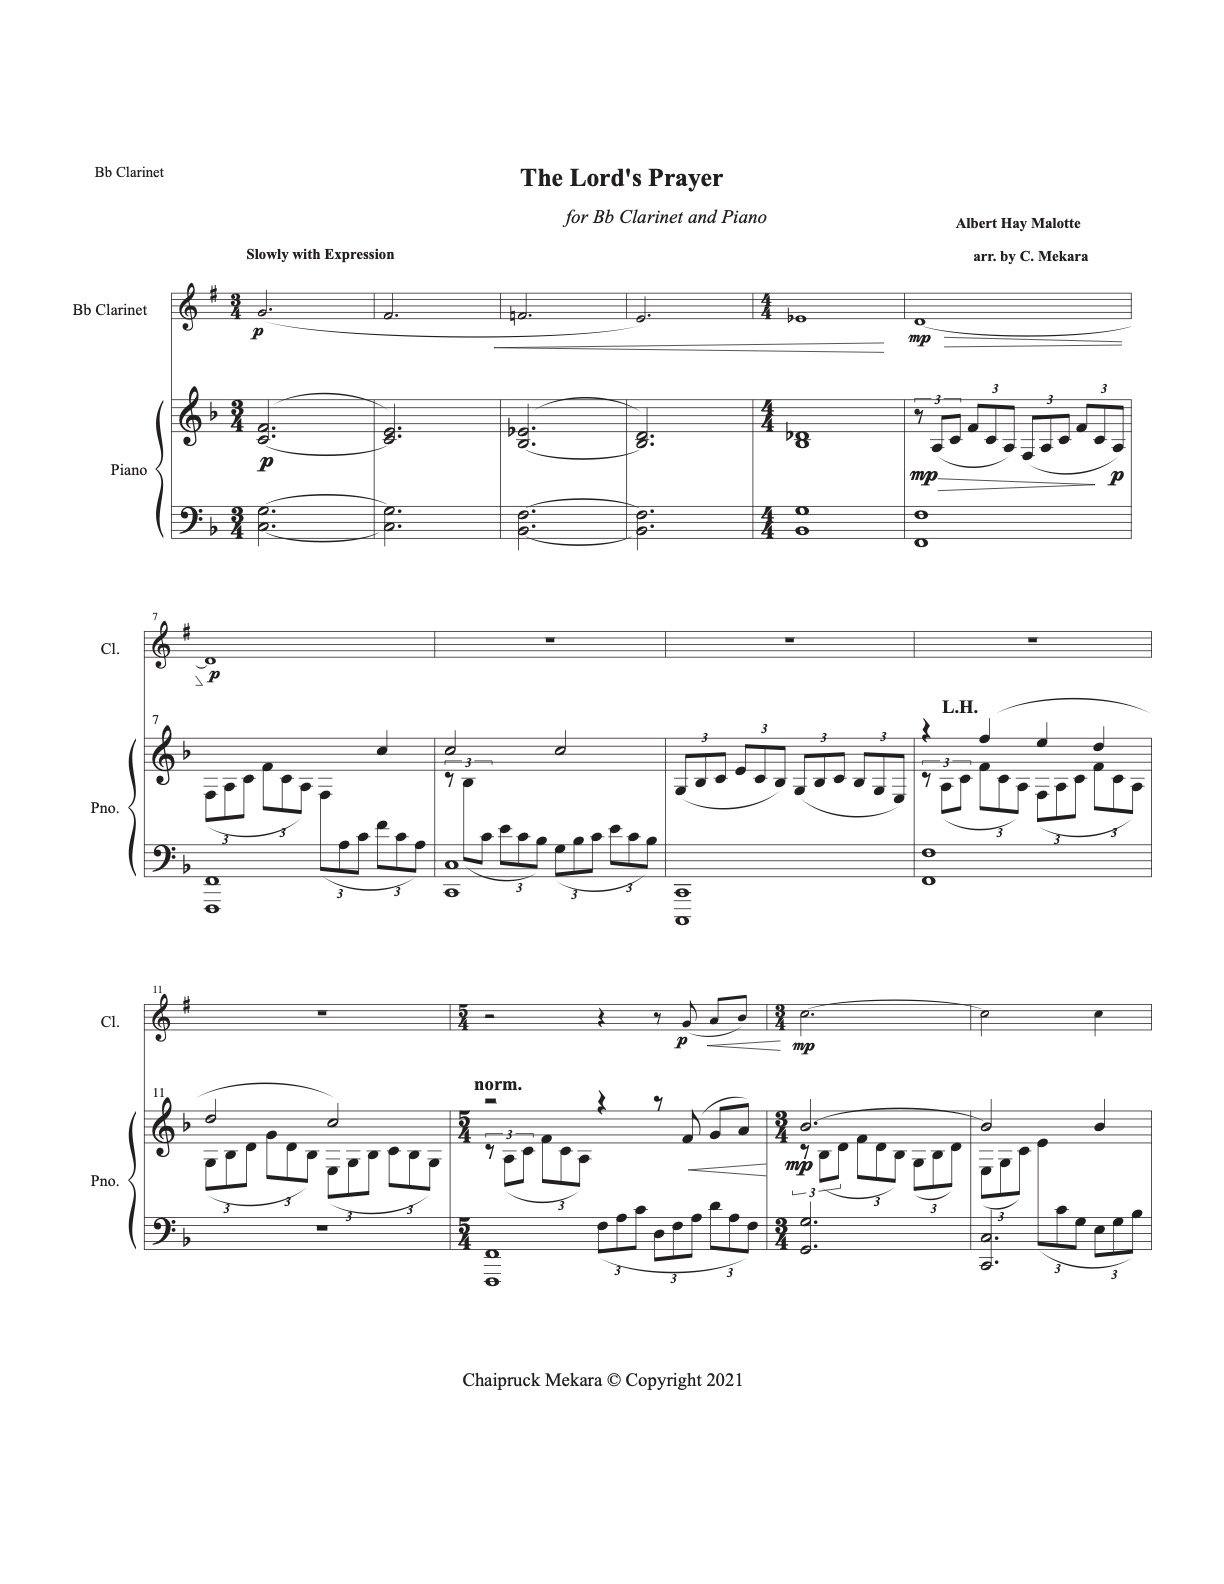 The Lord’s Prayer for Bb Clarinet and Piano (score+parts) - ChaipruckMekara